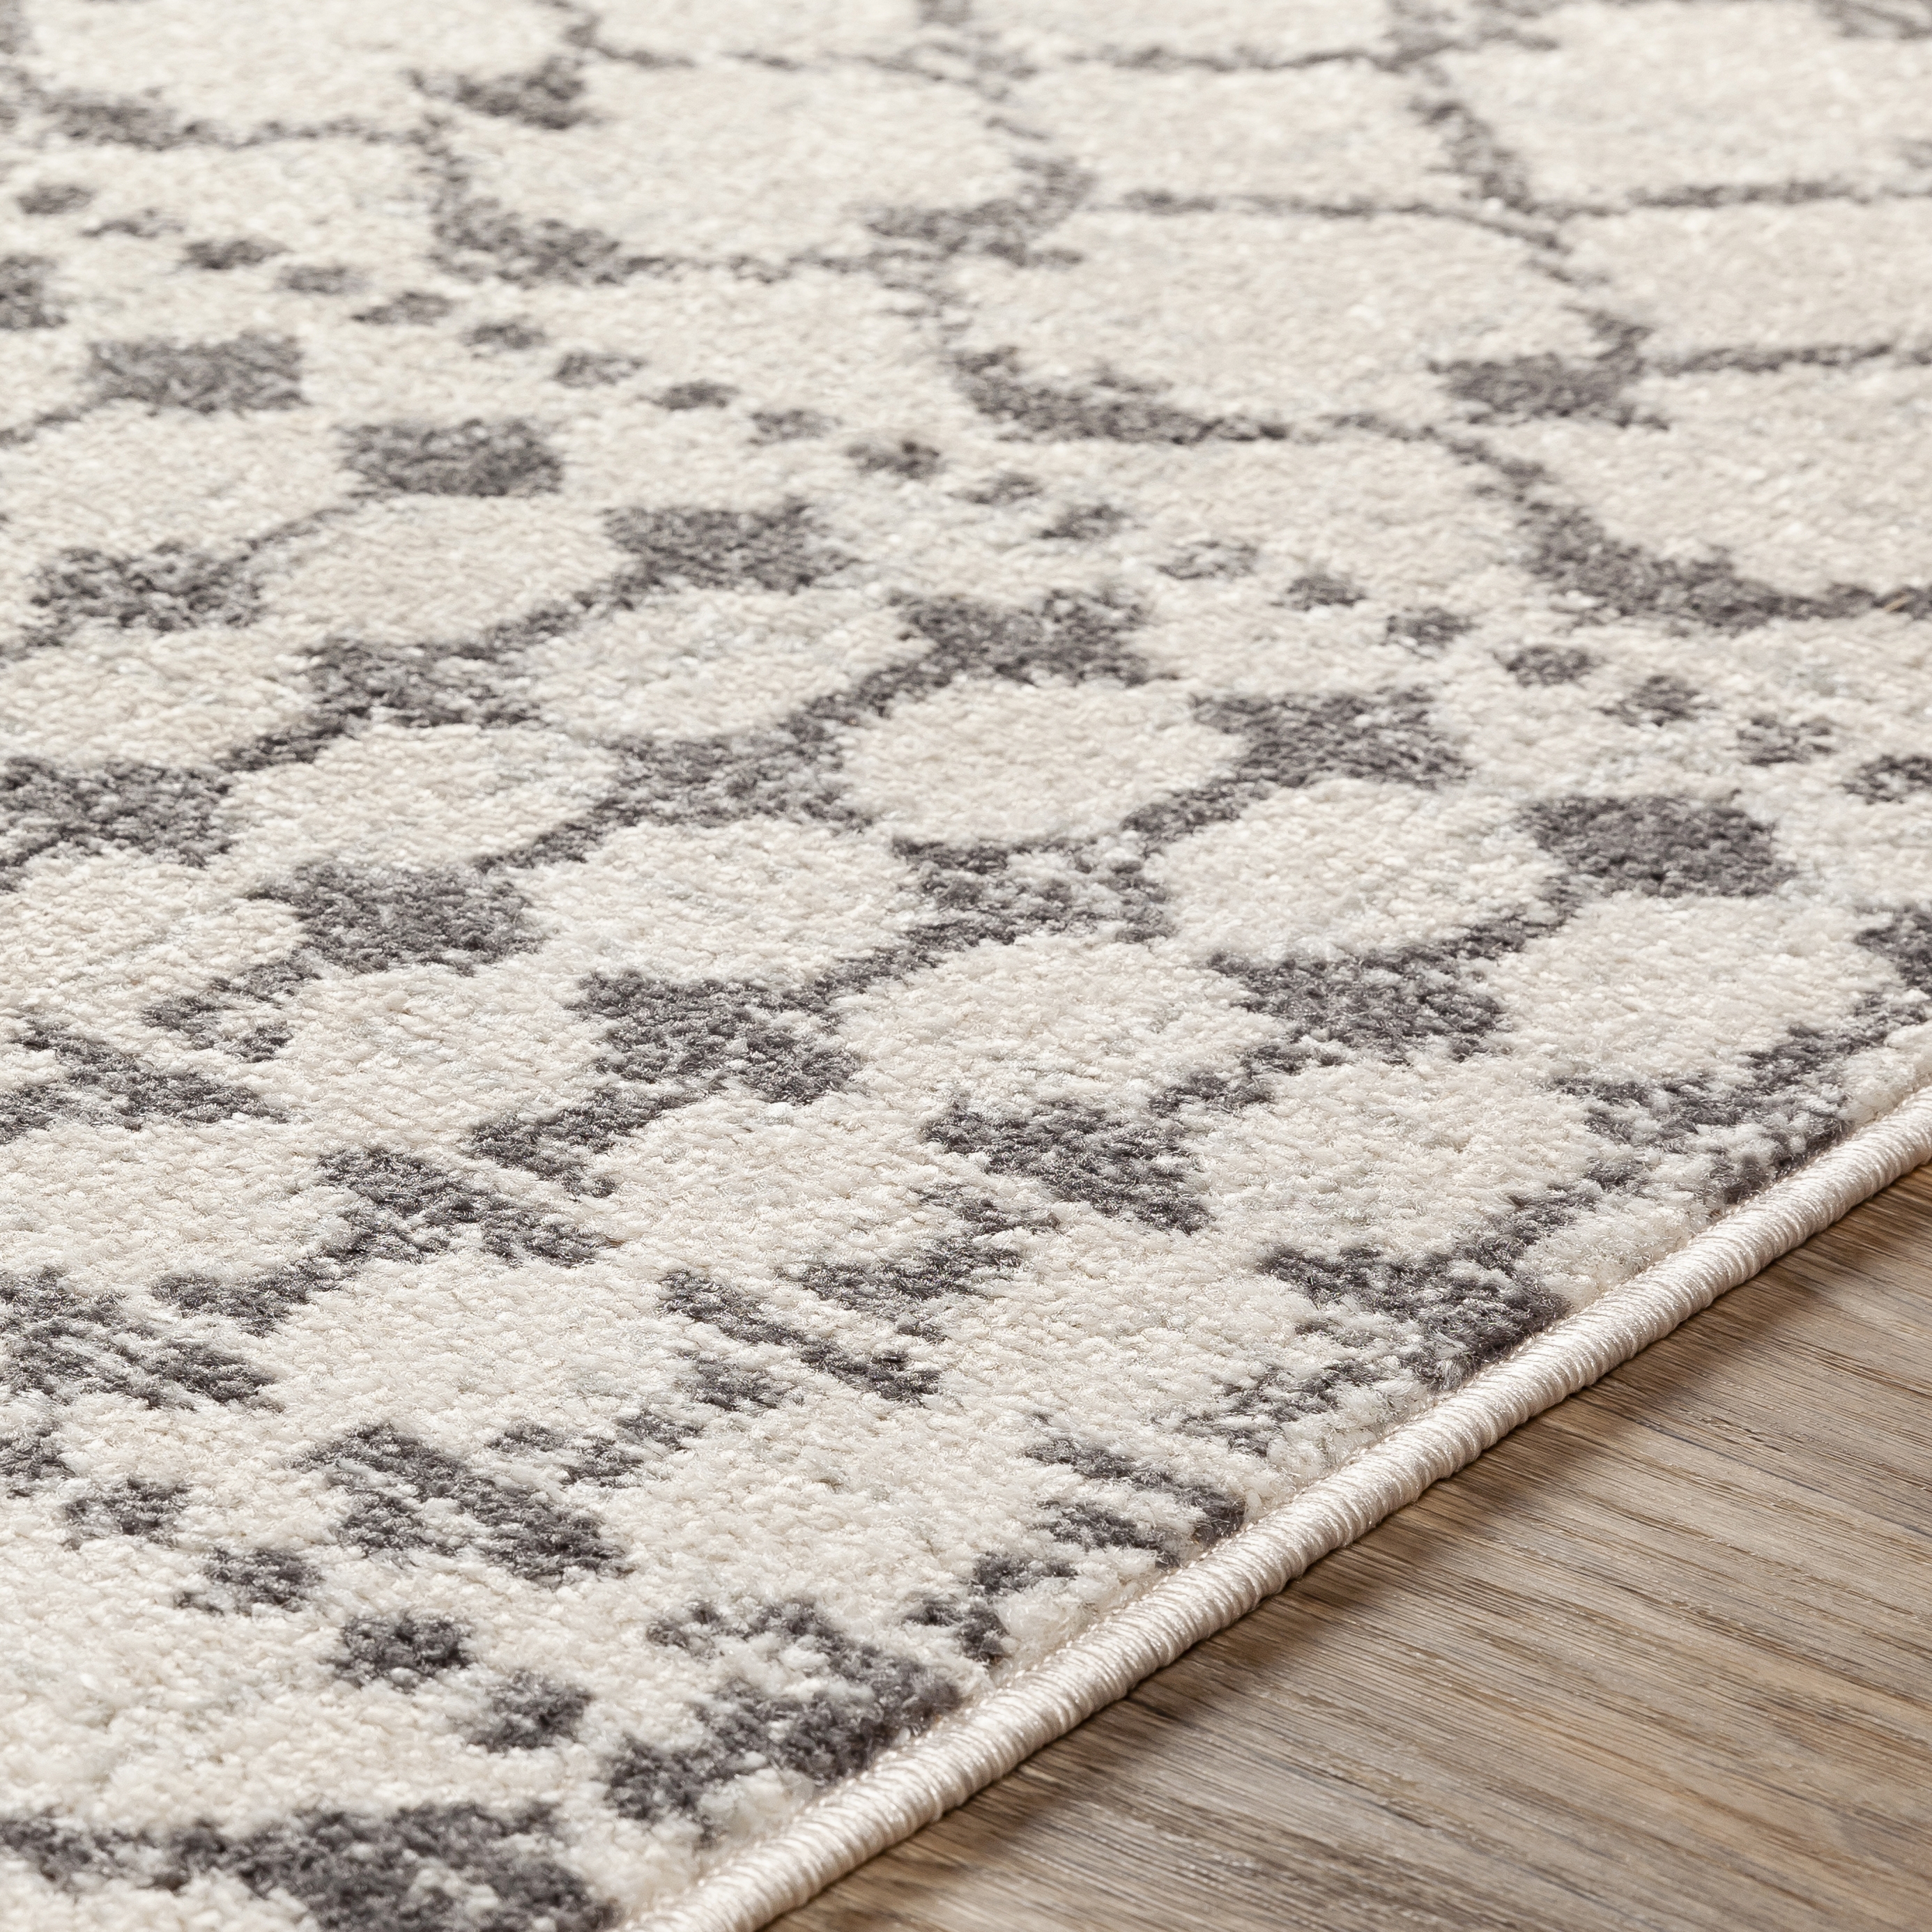 Chester Rug, 2'7" x 7'3" - Image 3